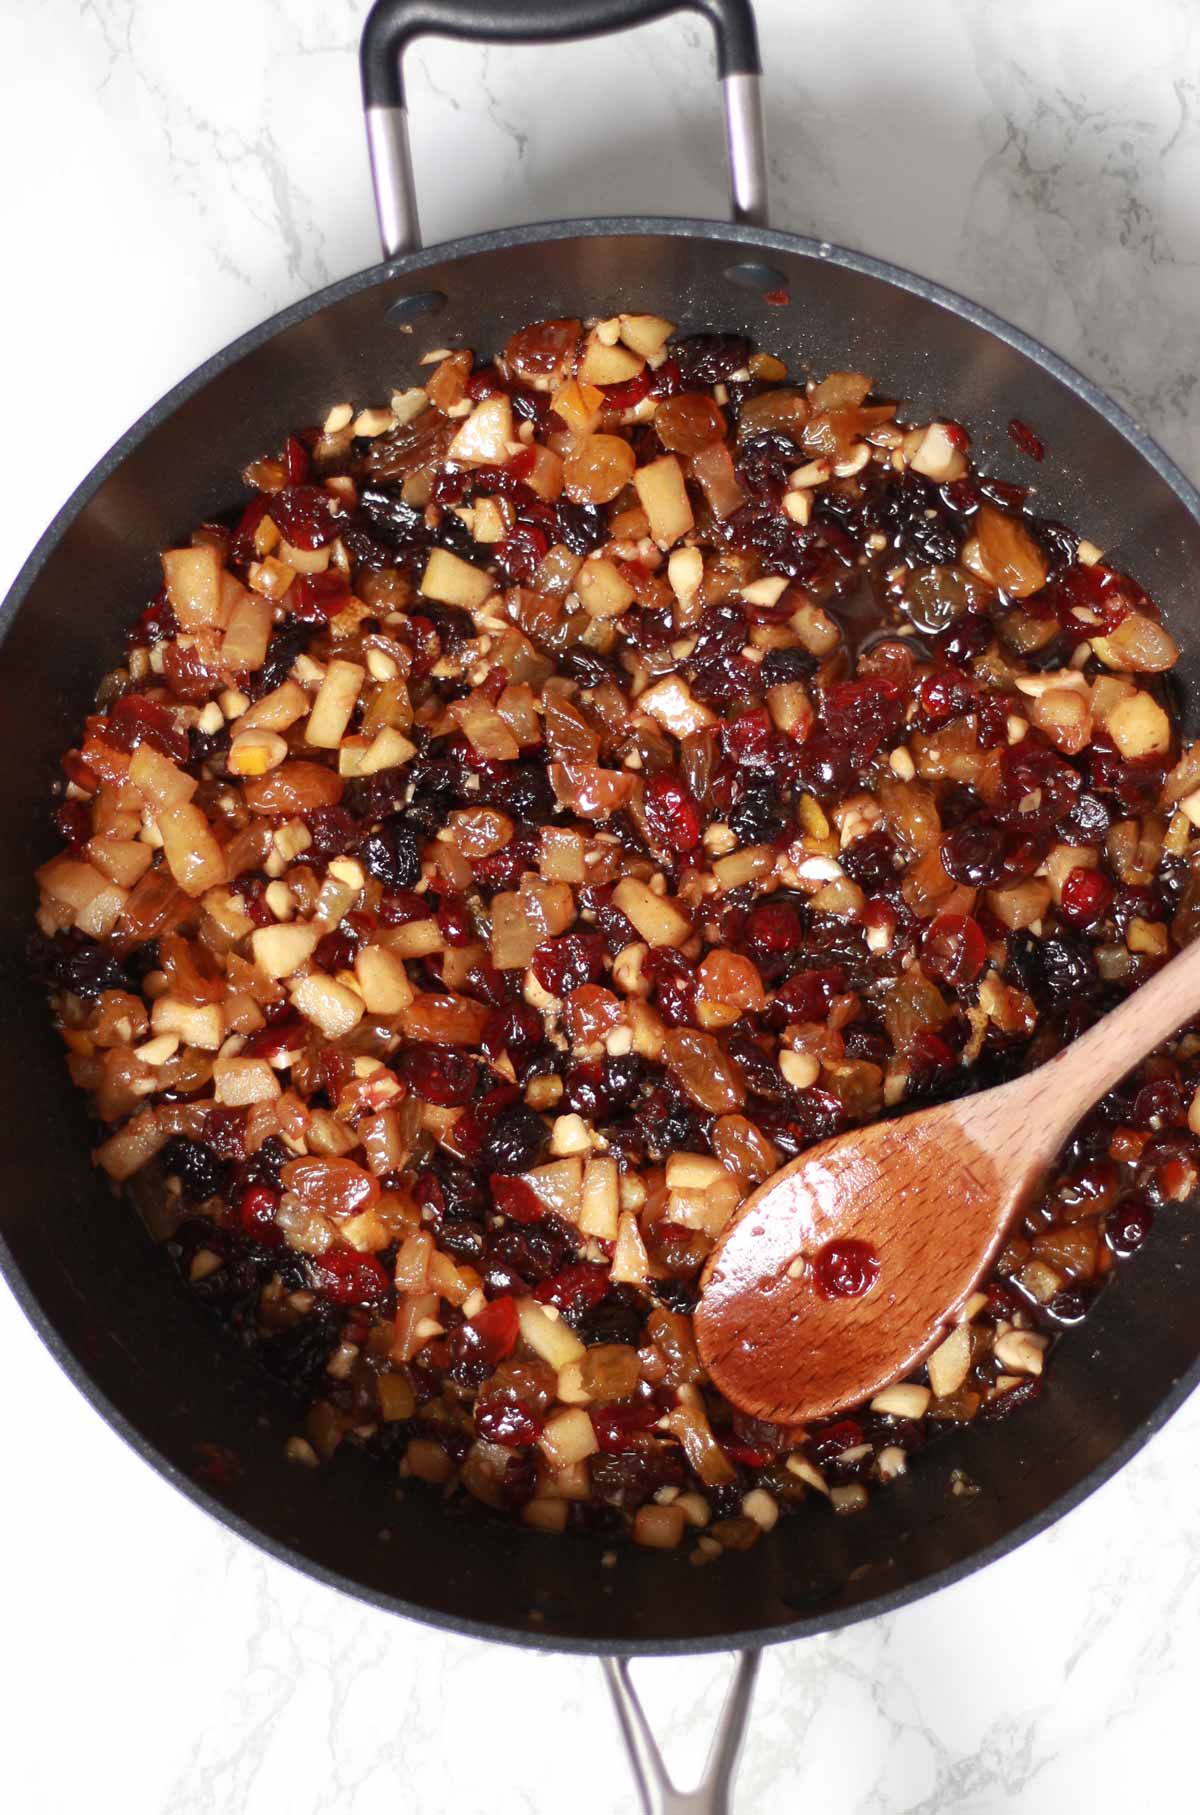 Cooked fruit and nuts In A Pan